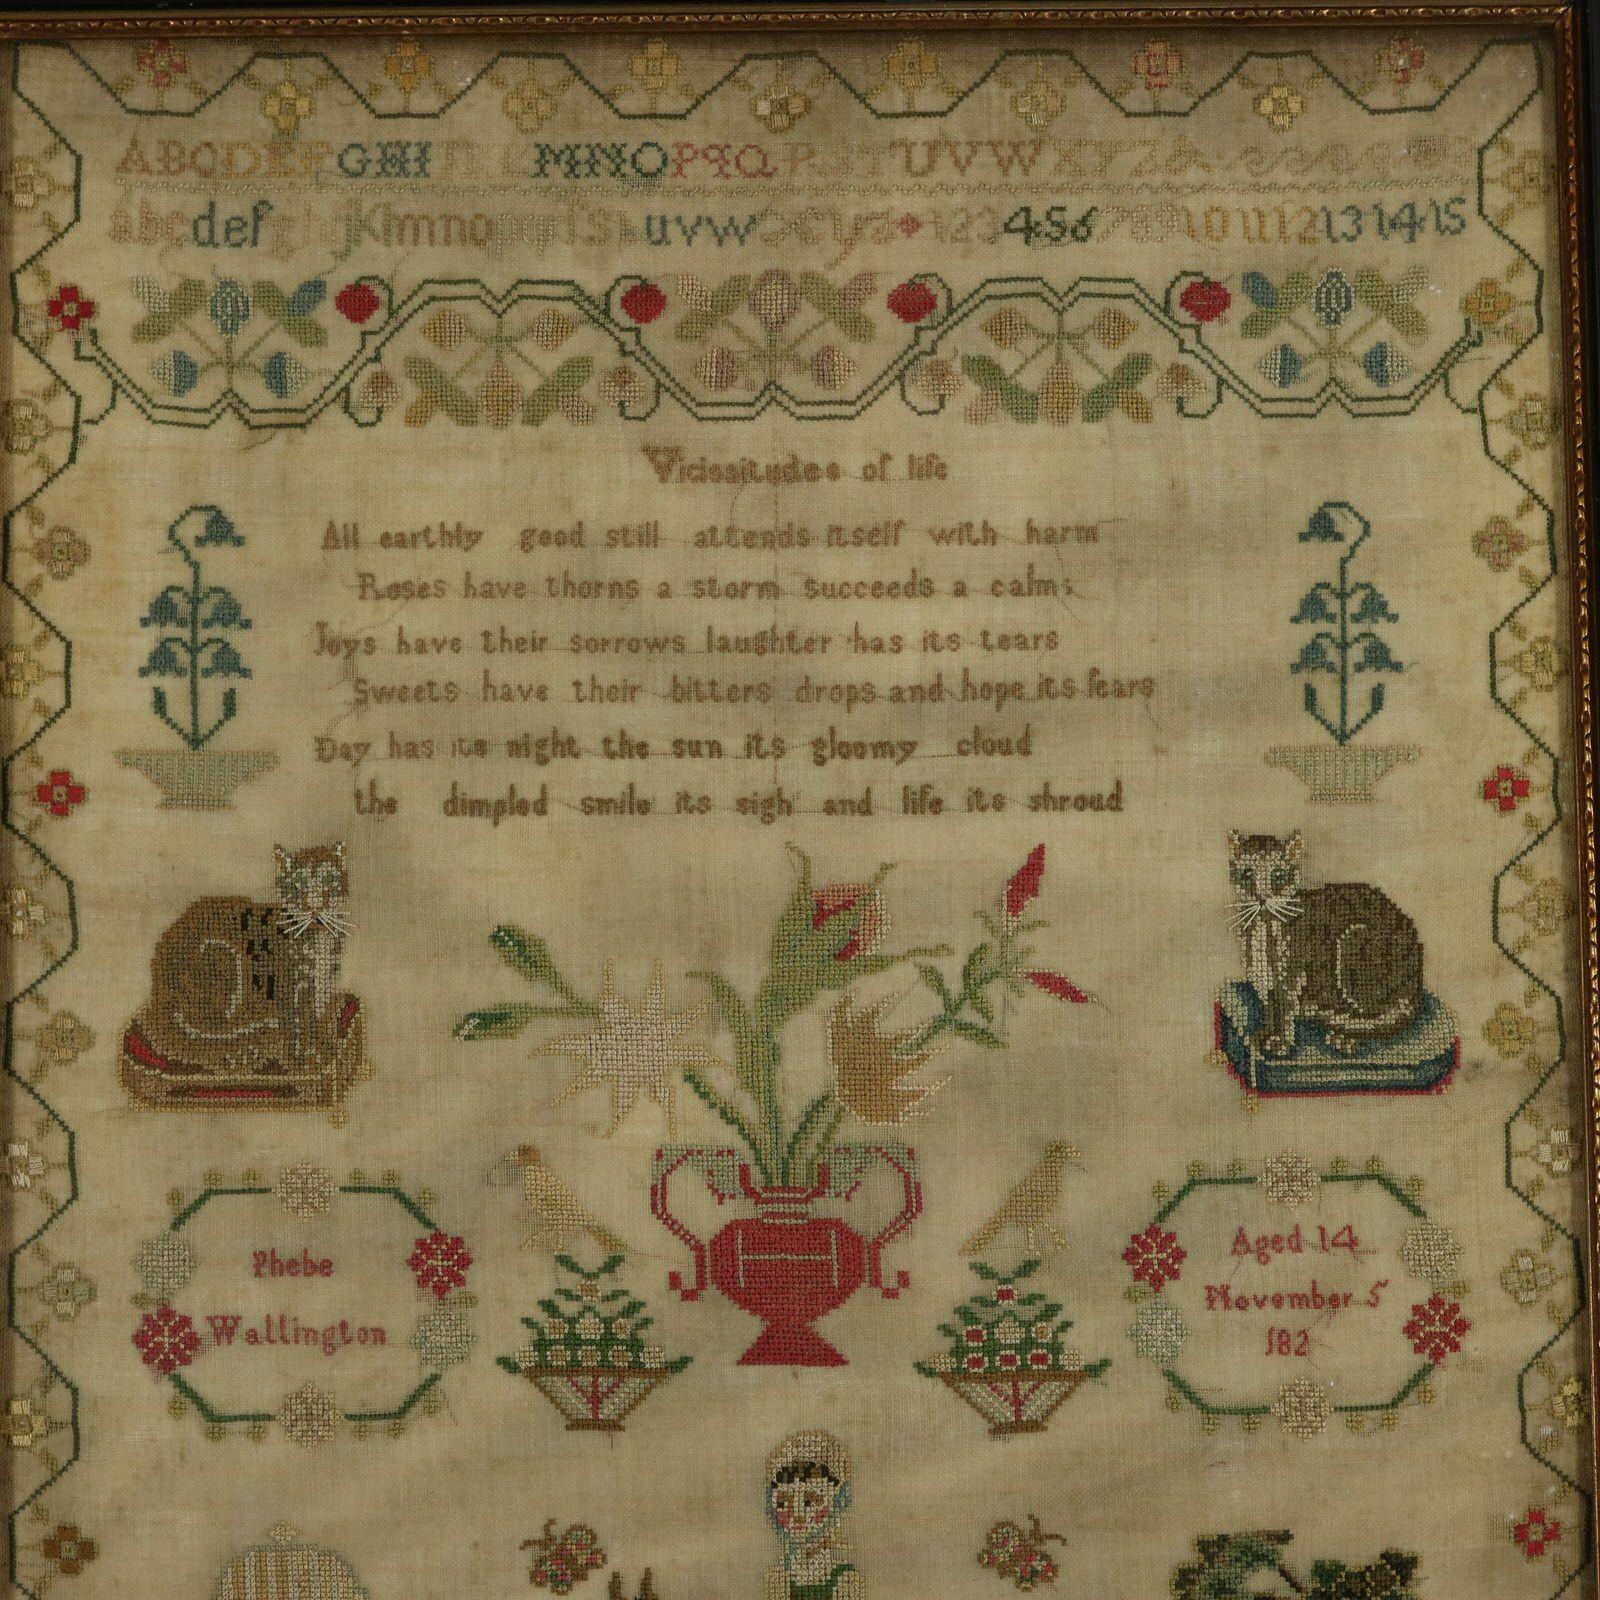 Regency Sampler, stitched in the 1820's, by Phebe Wallington. The sampler is worked in silk threads on a linen ground, mainly in cross stitch. Meandering floral border. Colours red, green, copper, gold, black and blue. Alphabets A-Z in upper case